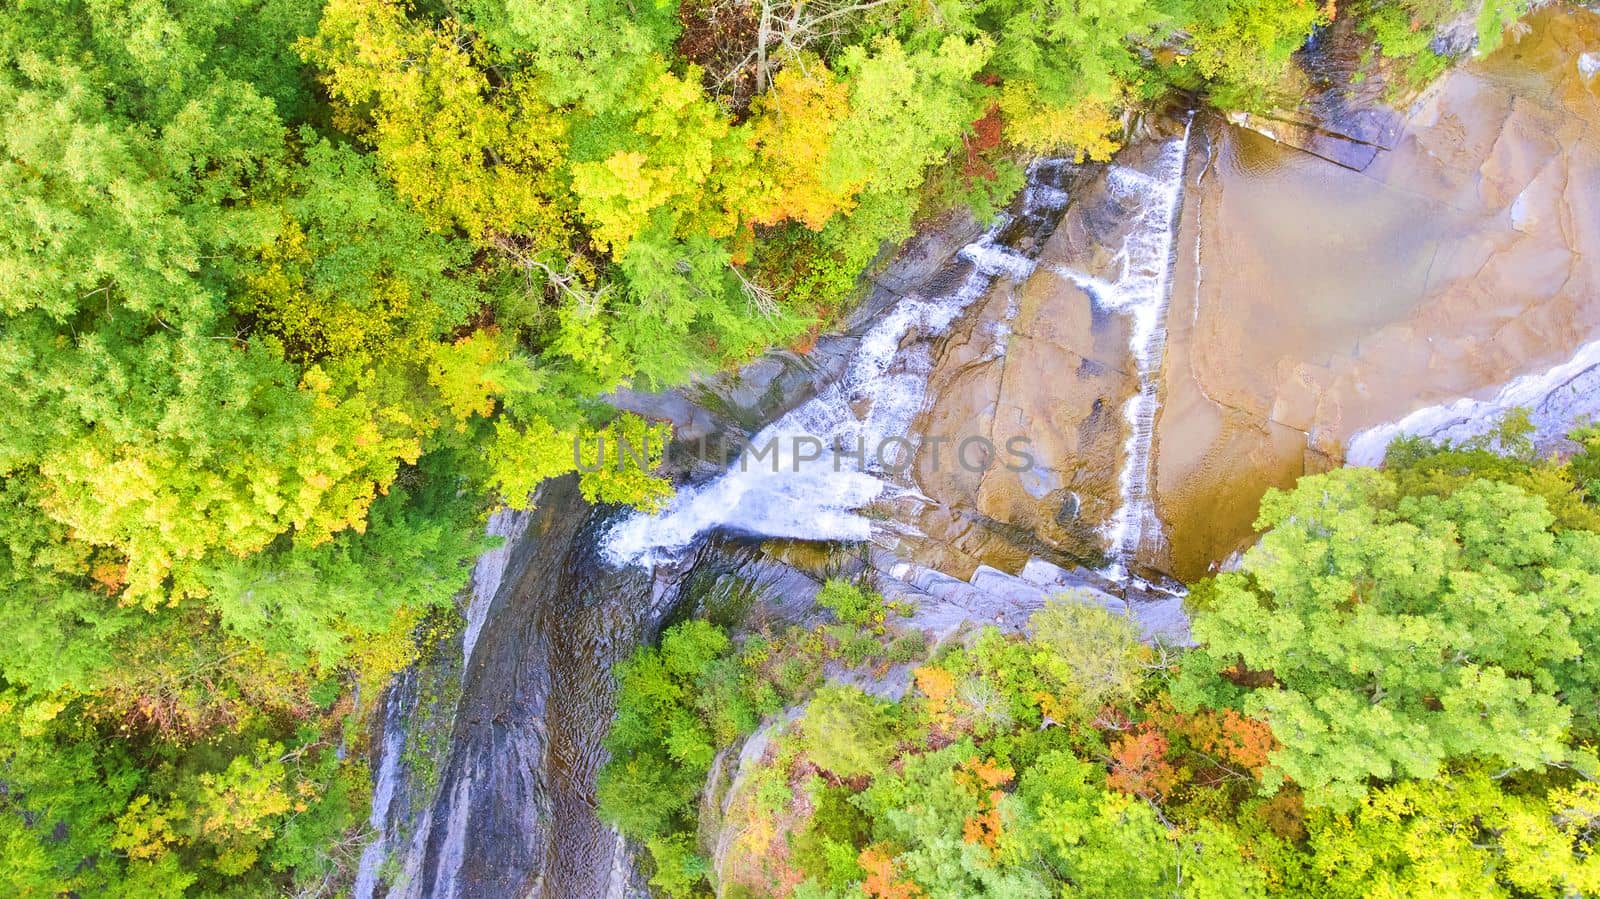 Image of Looking down over waterfall going into deep gorge surrounded by green forest